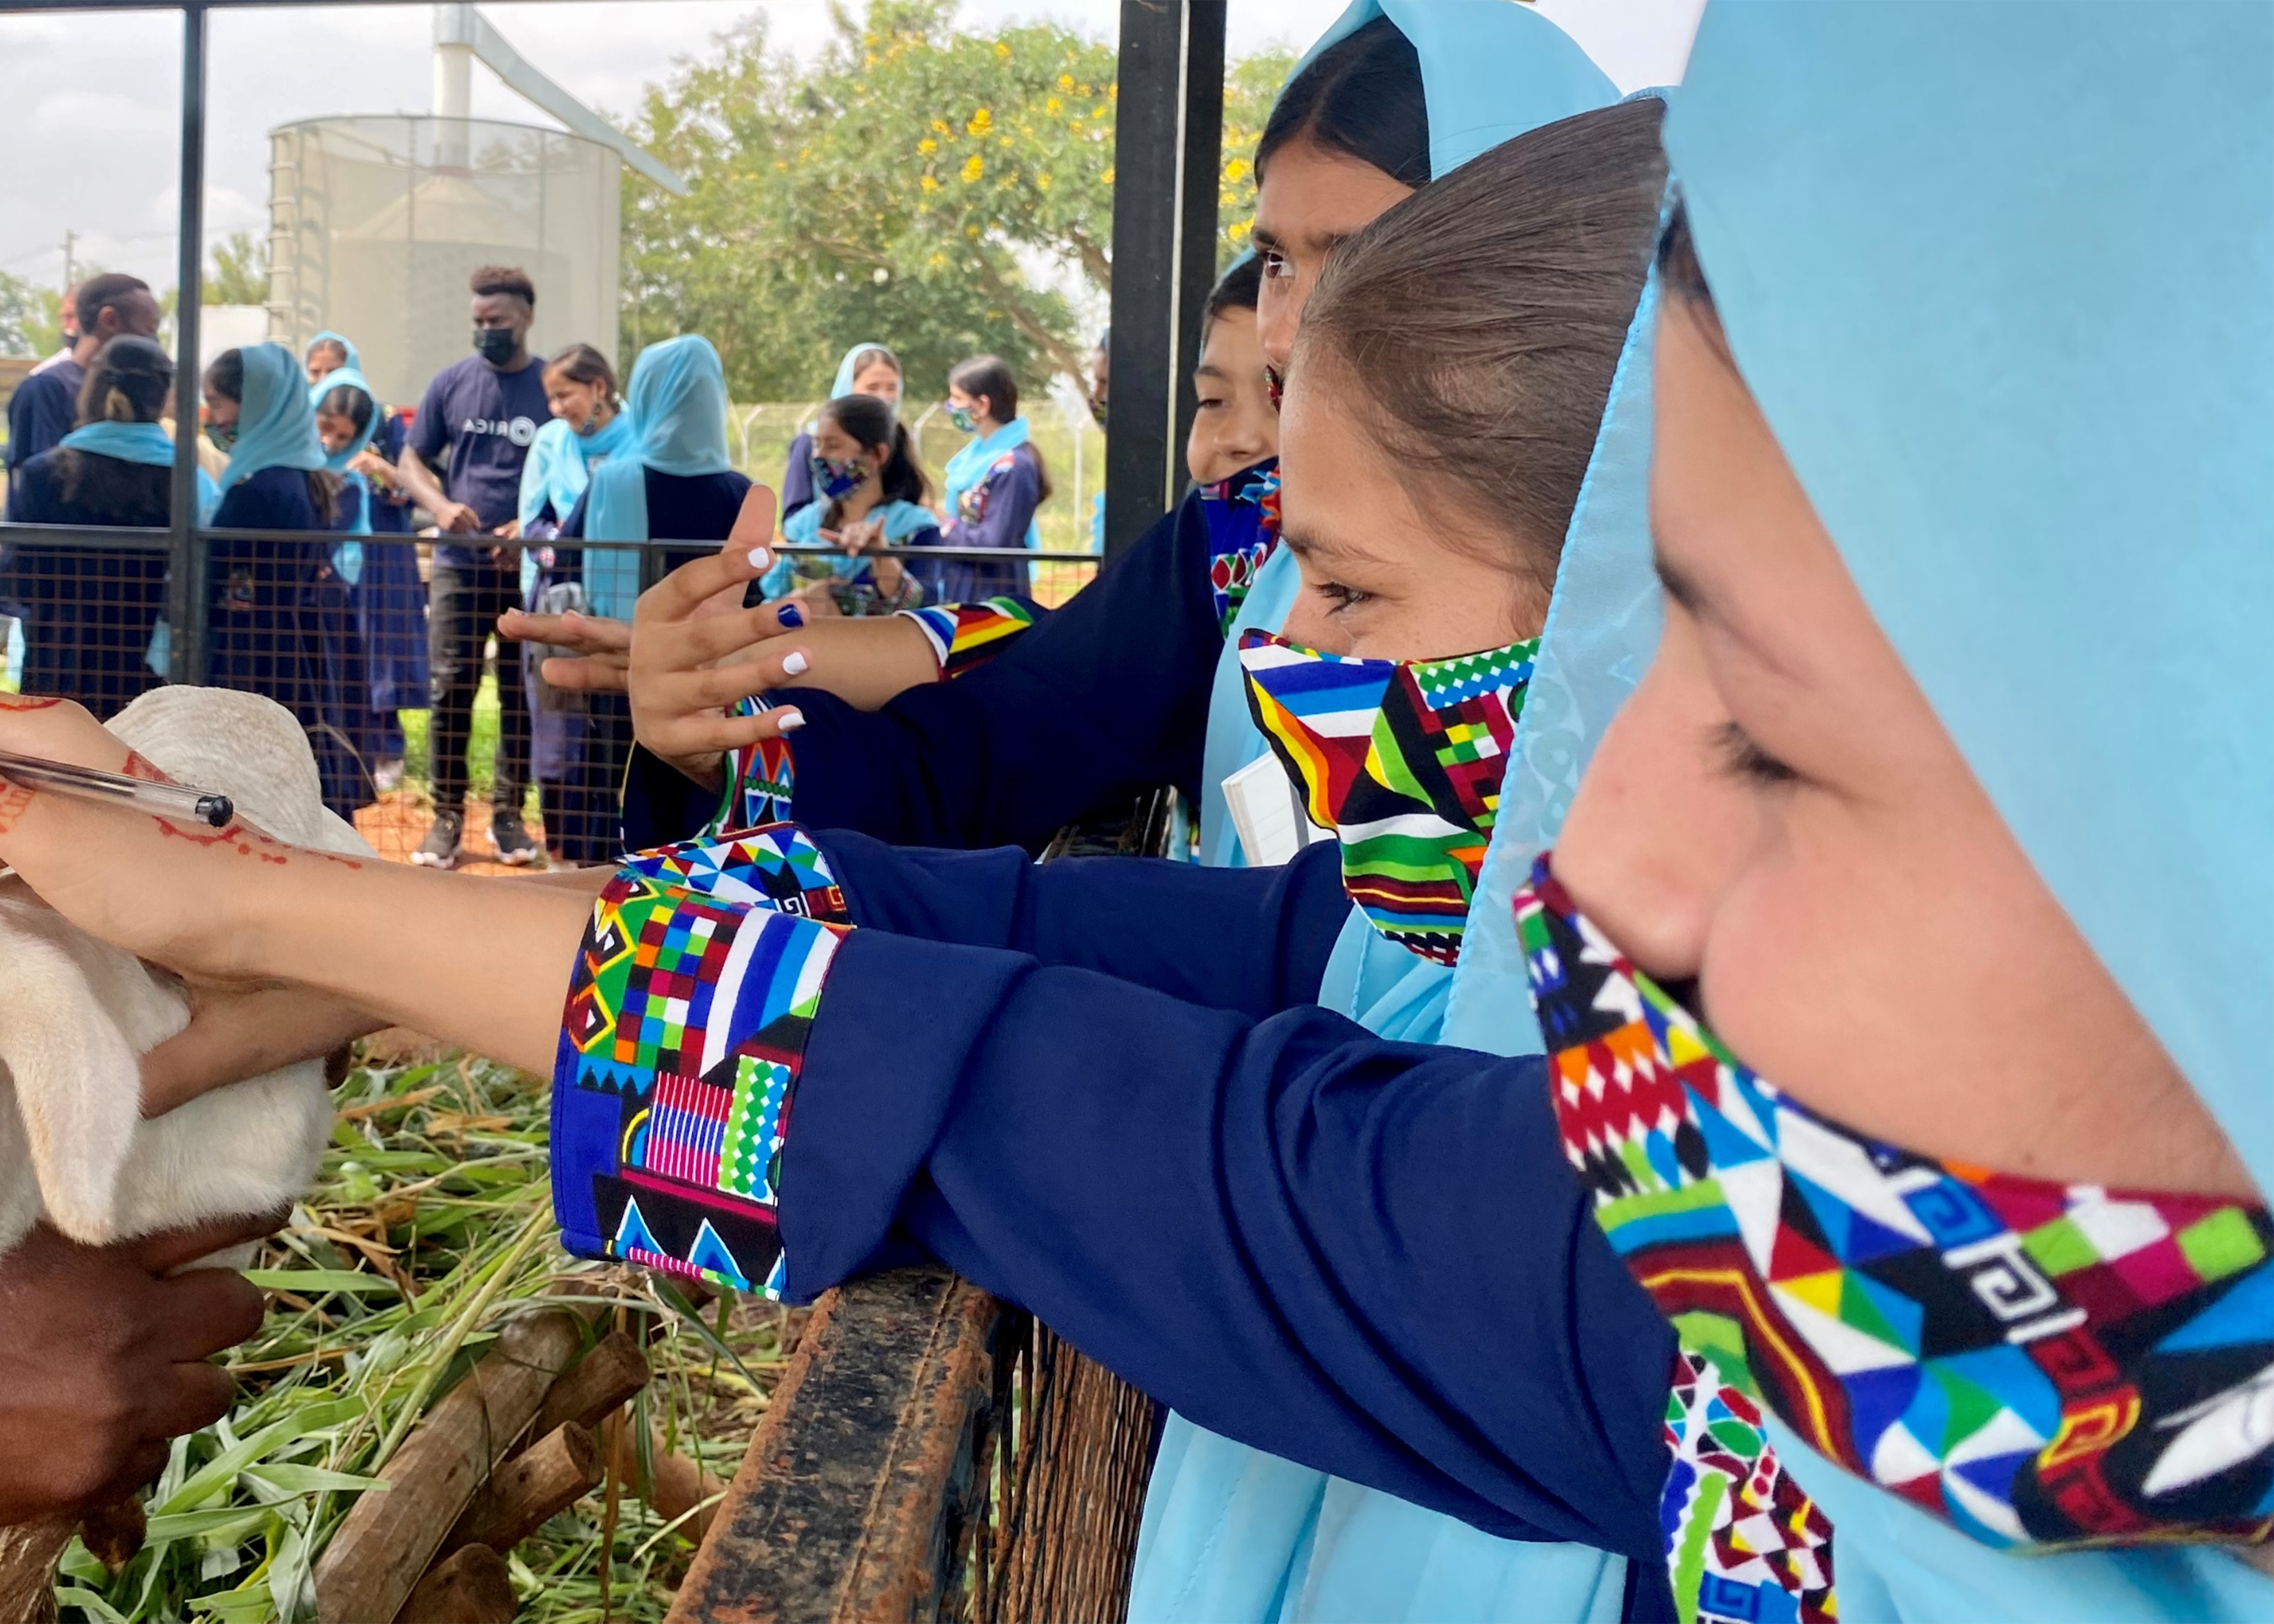 SOLA, School of Leadership Afghanistan—Rising from darkness